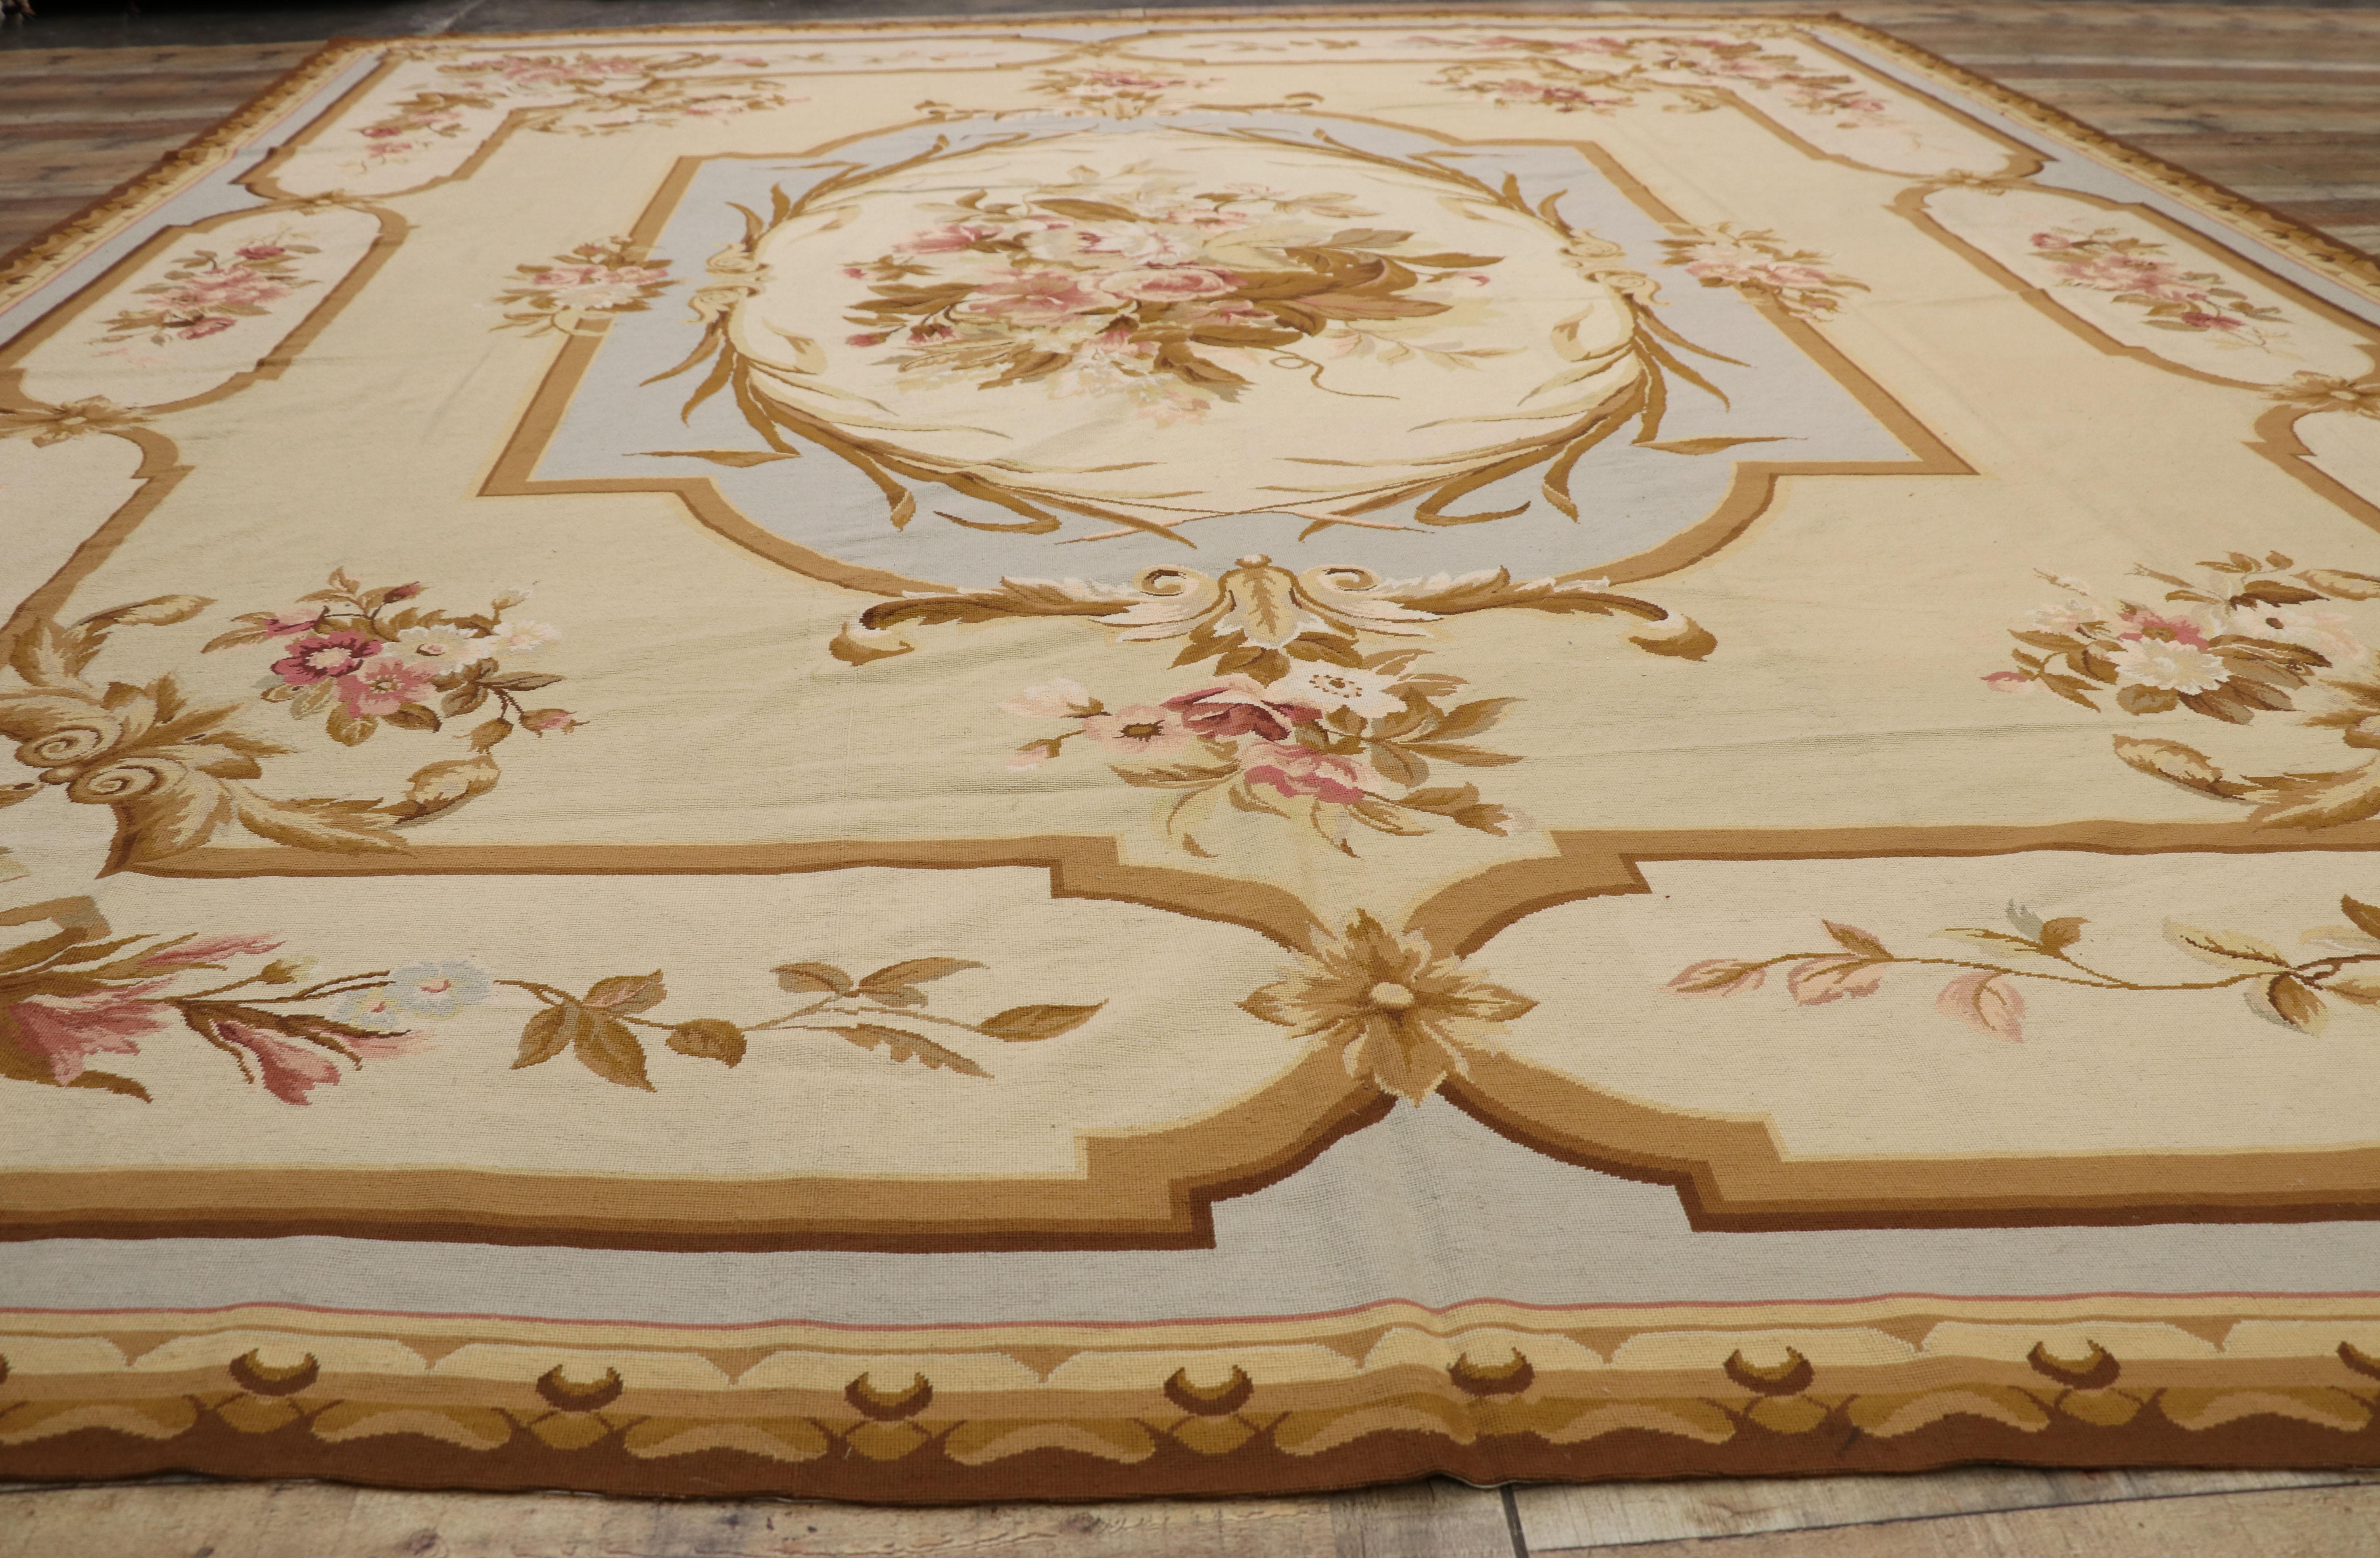 20th Century Vintage Chinese Needlepoint Rug with Aubusson Design and French Provincial Style